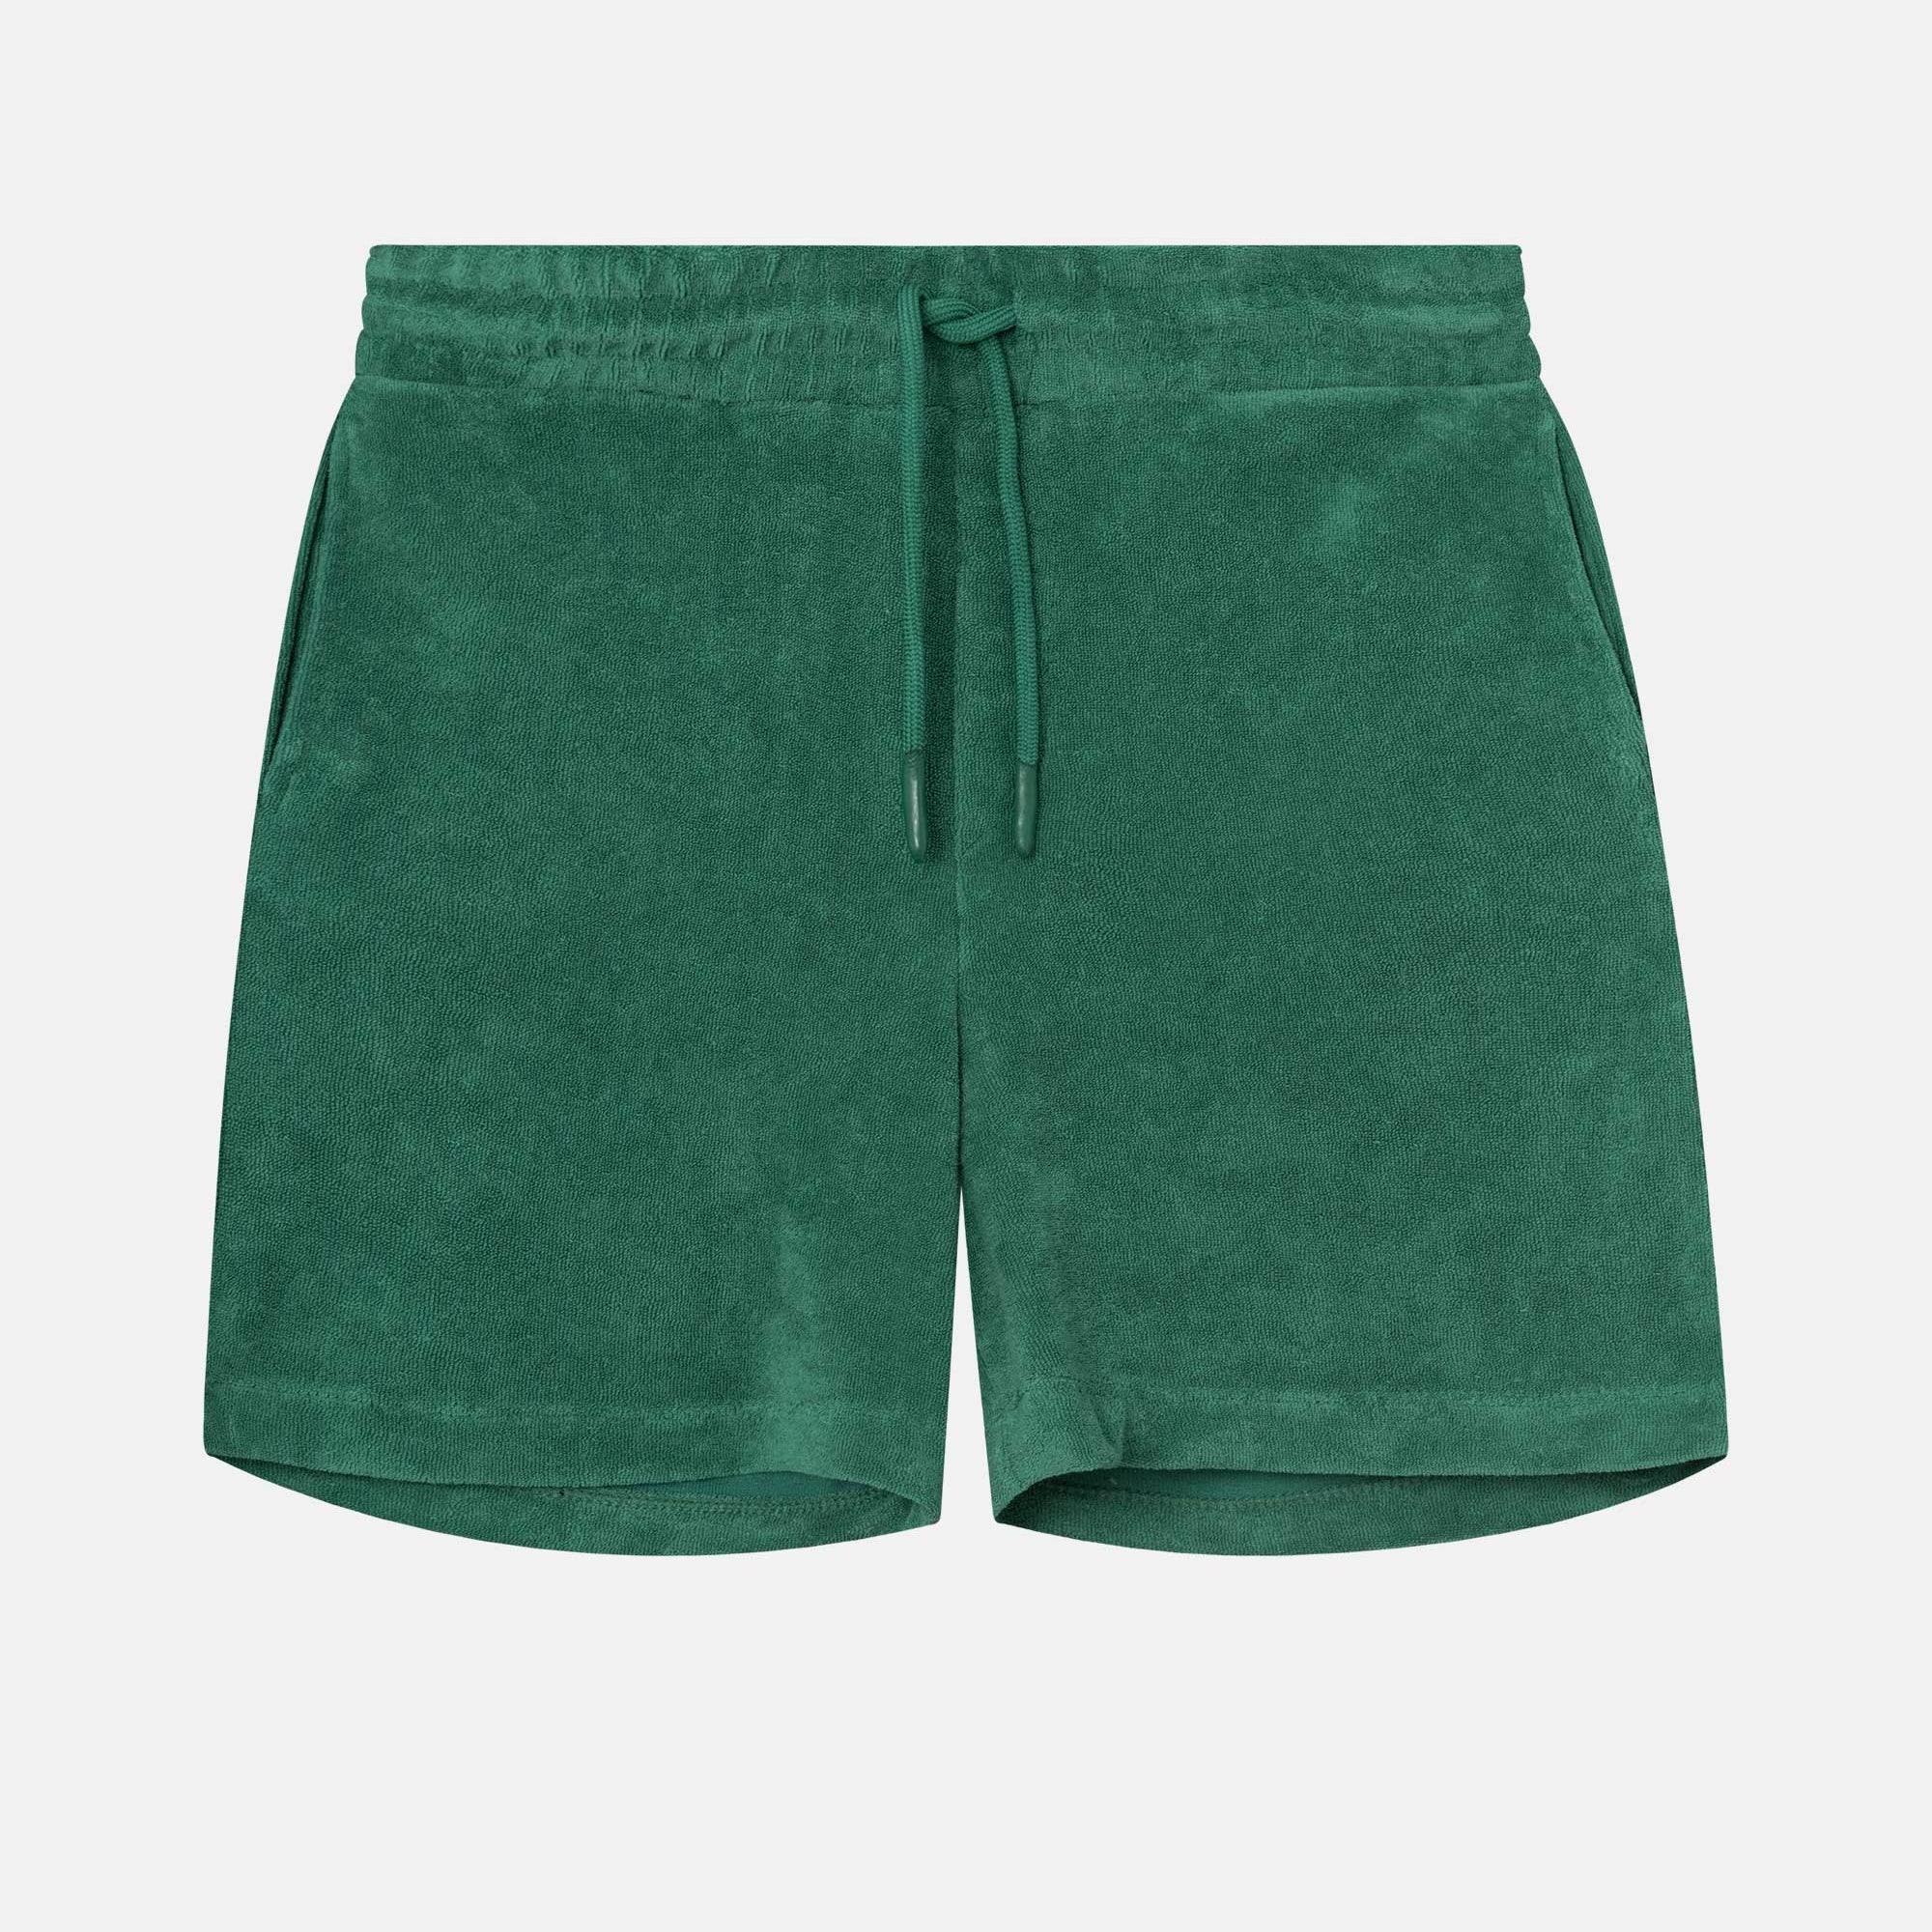 Green mid length shorts in terry toweling fabric with drawdtring and two side pockets.